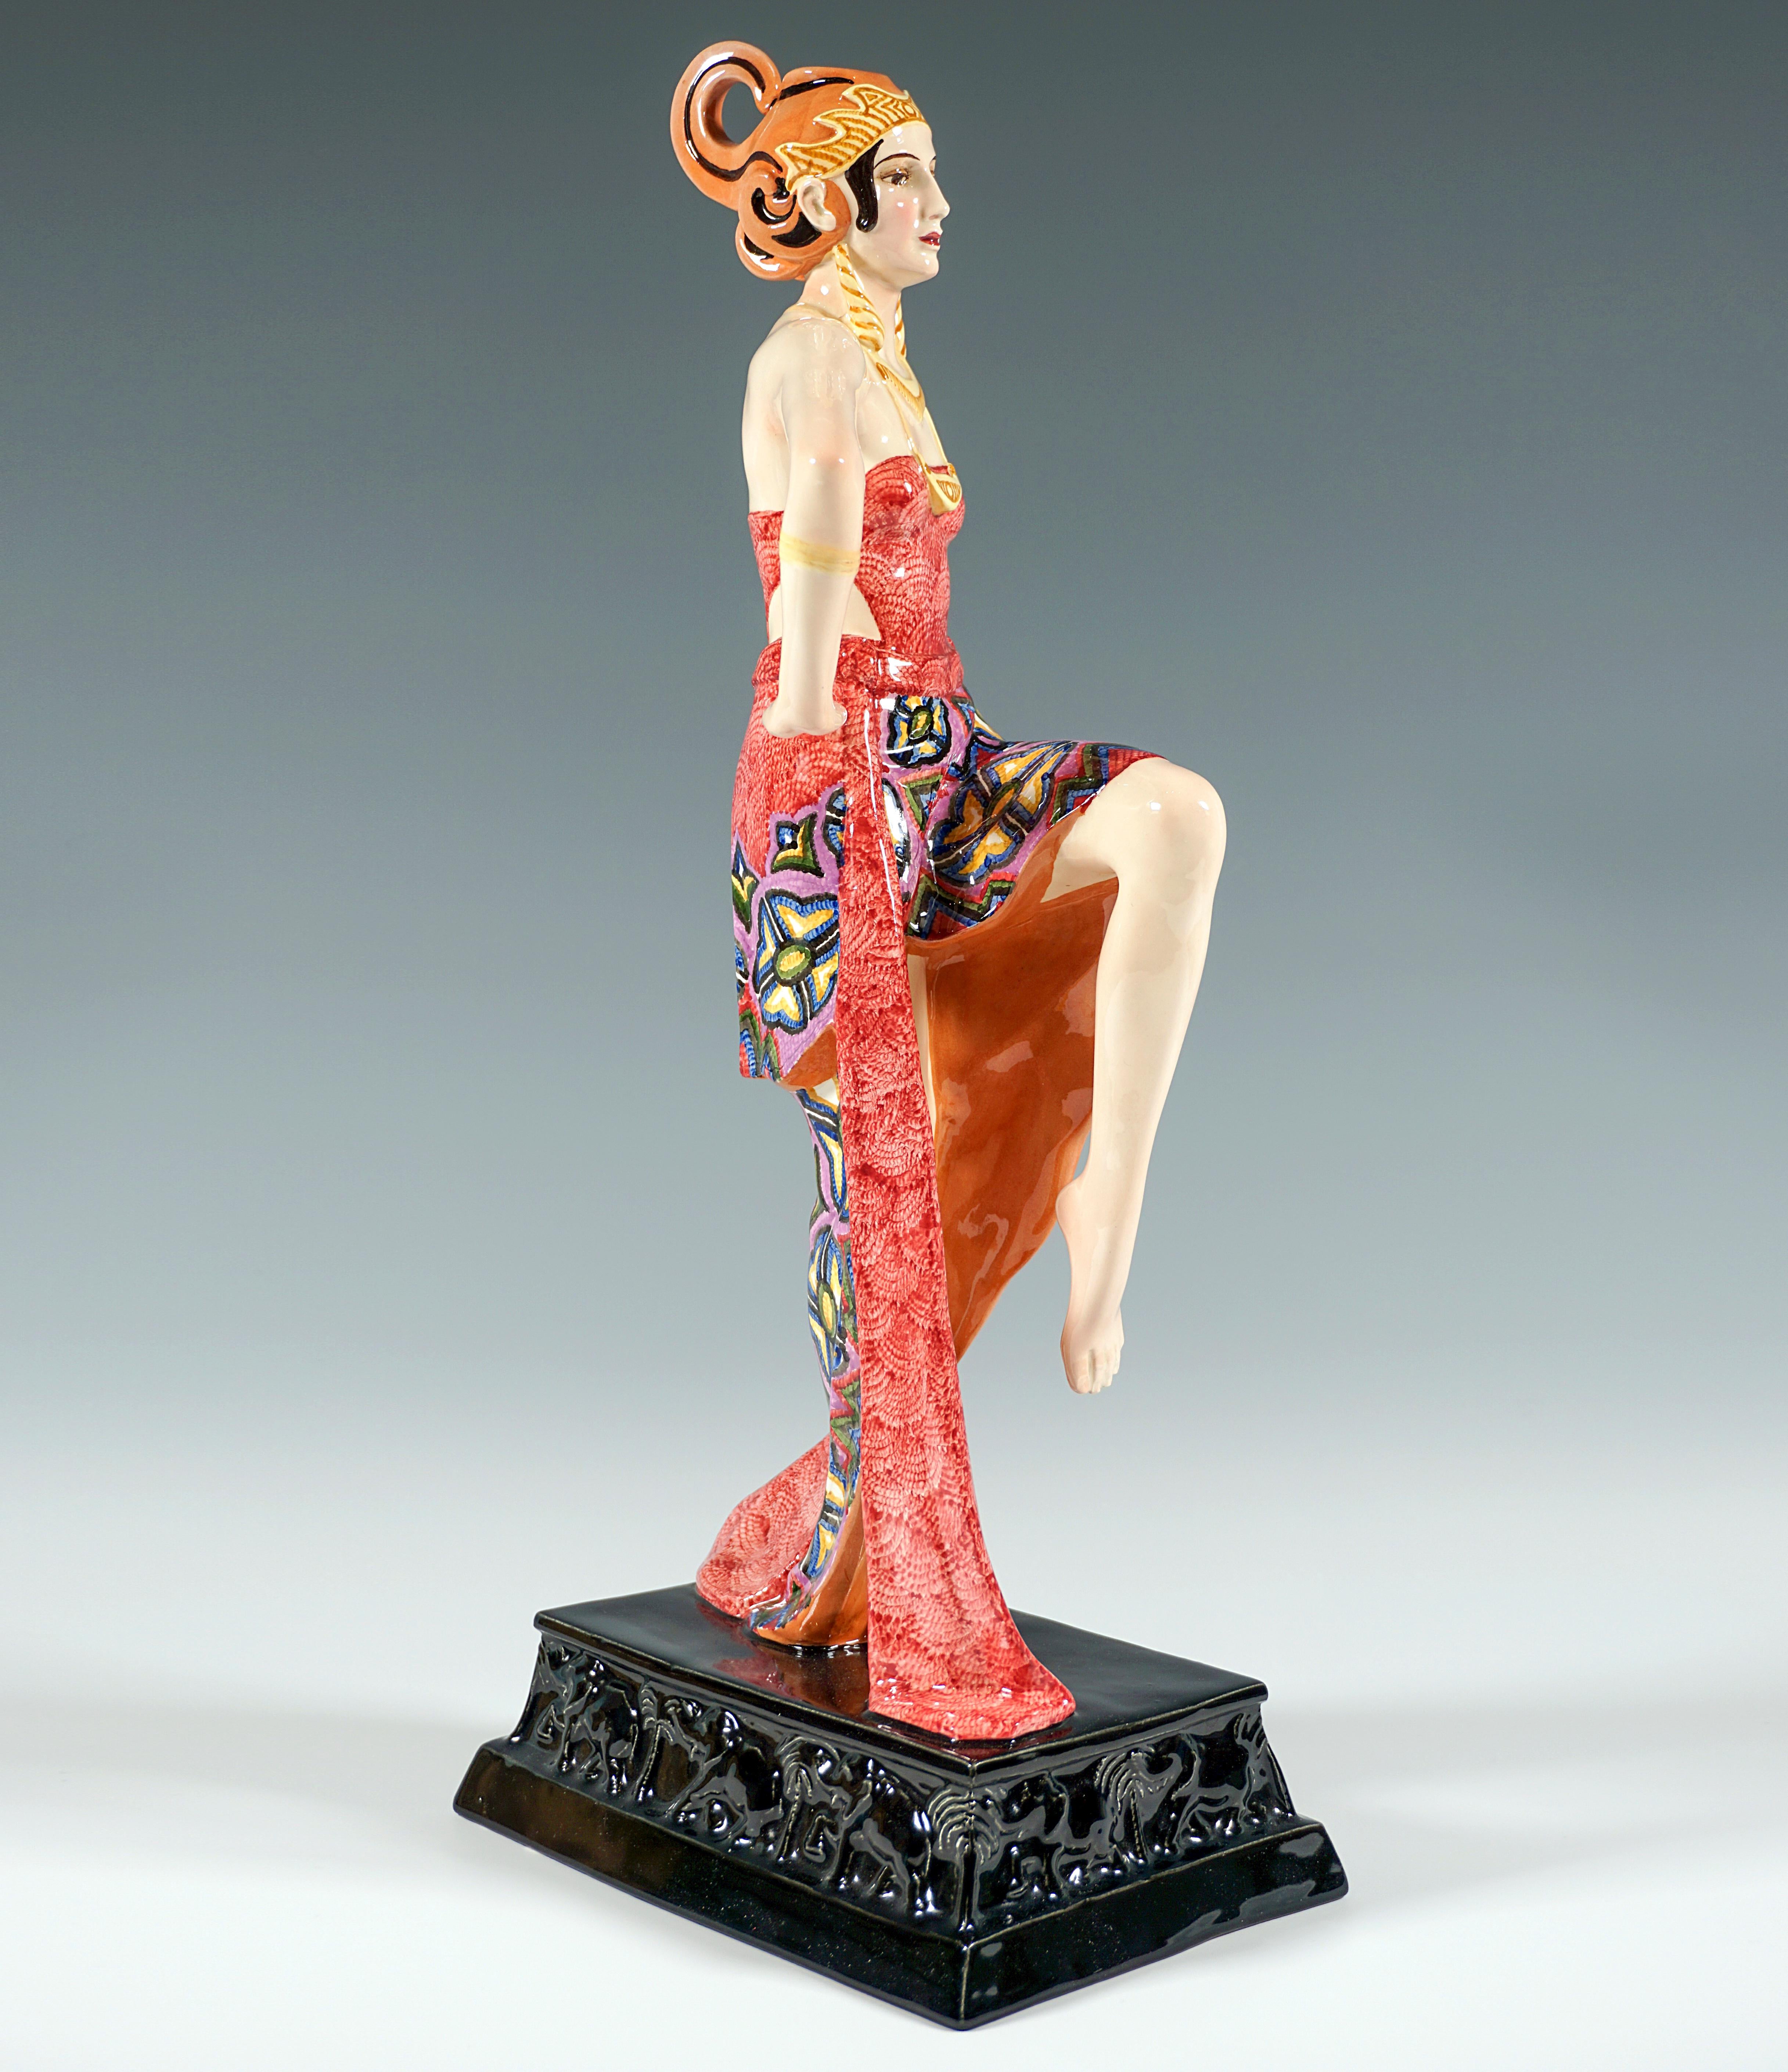 An exceptional model by the Goldscheider company, which has only rarely been produced:

A dancer posing upright, standing barefoot on one leg, wearing an elaborate, exotic headdress with a flame-like jagged tiara and a volute bent upwards at the